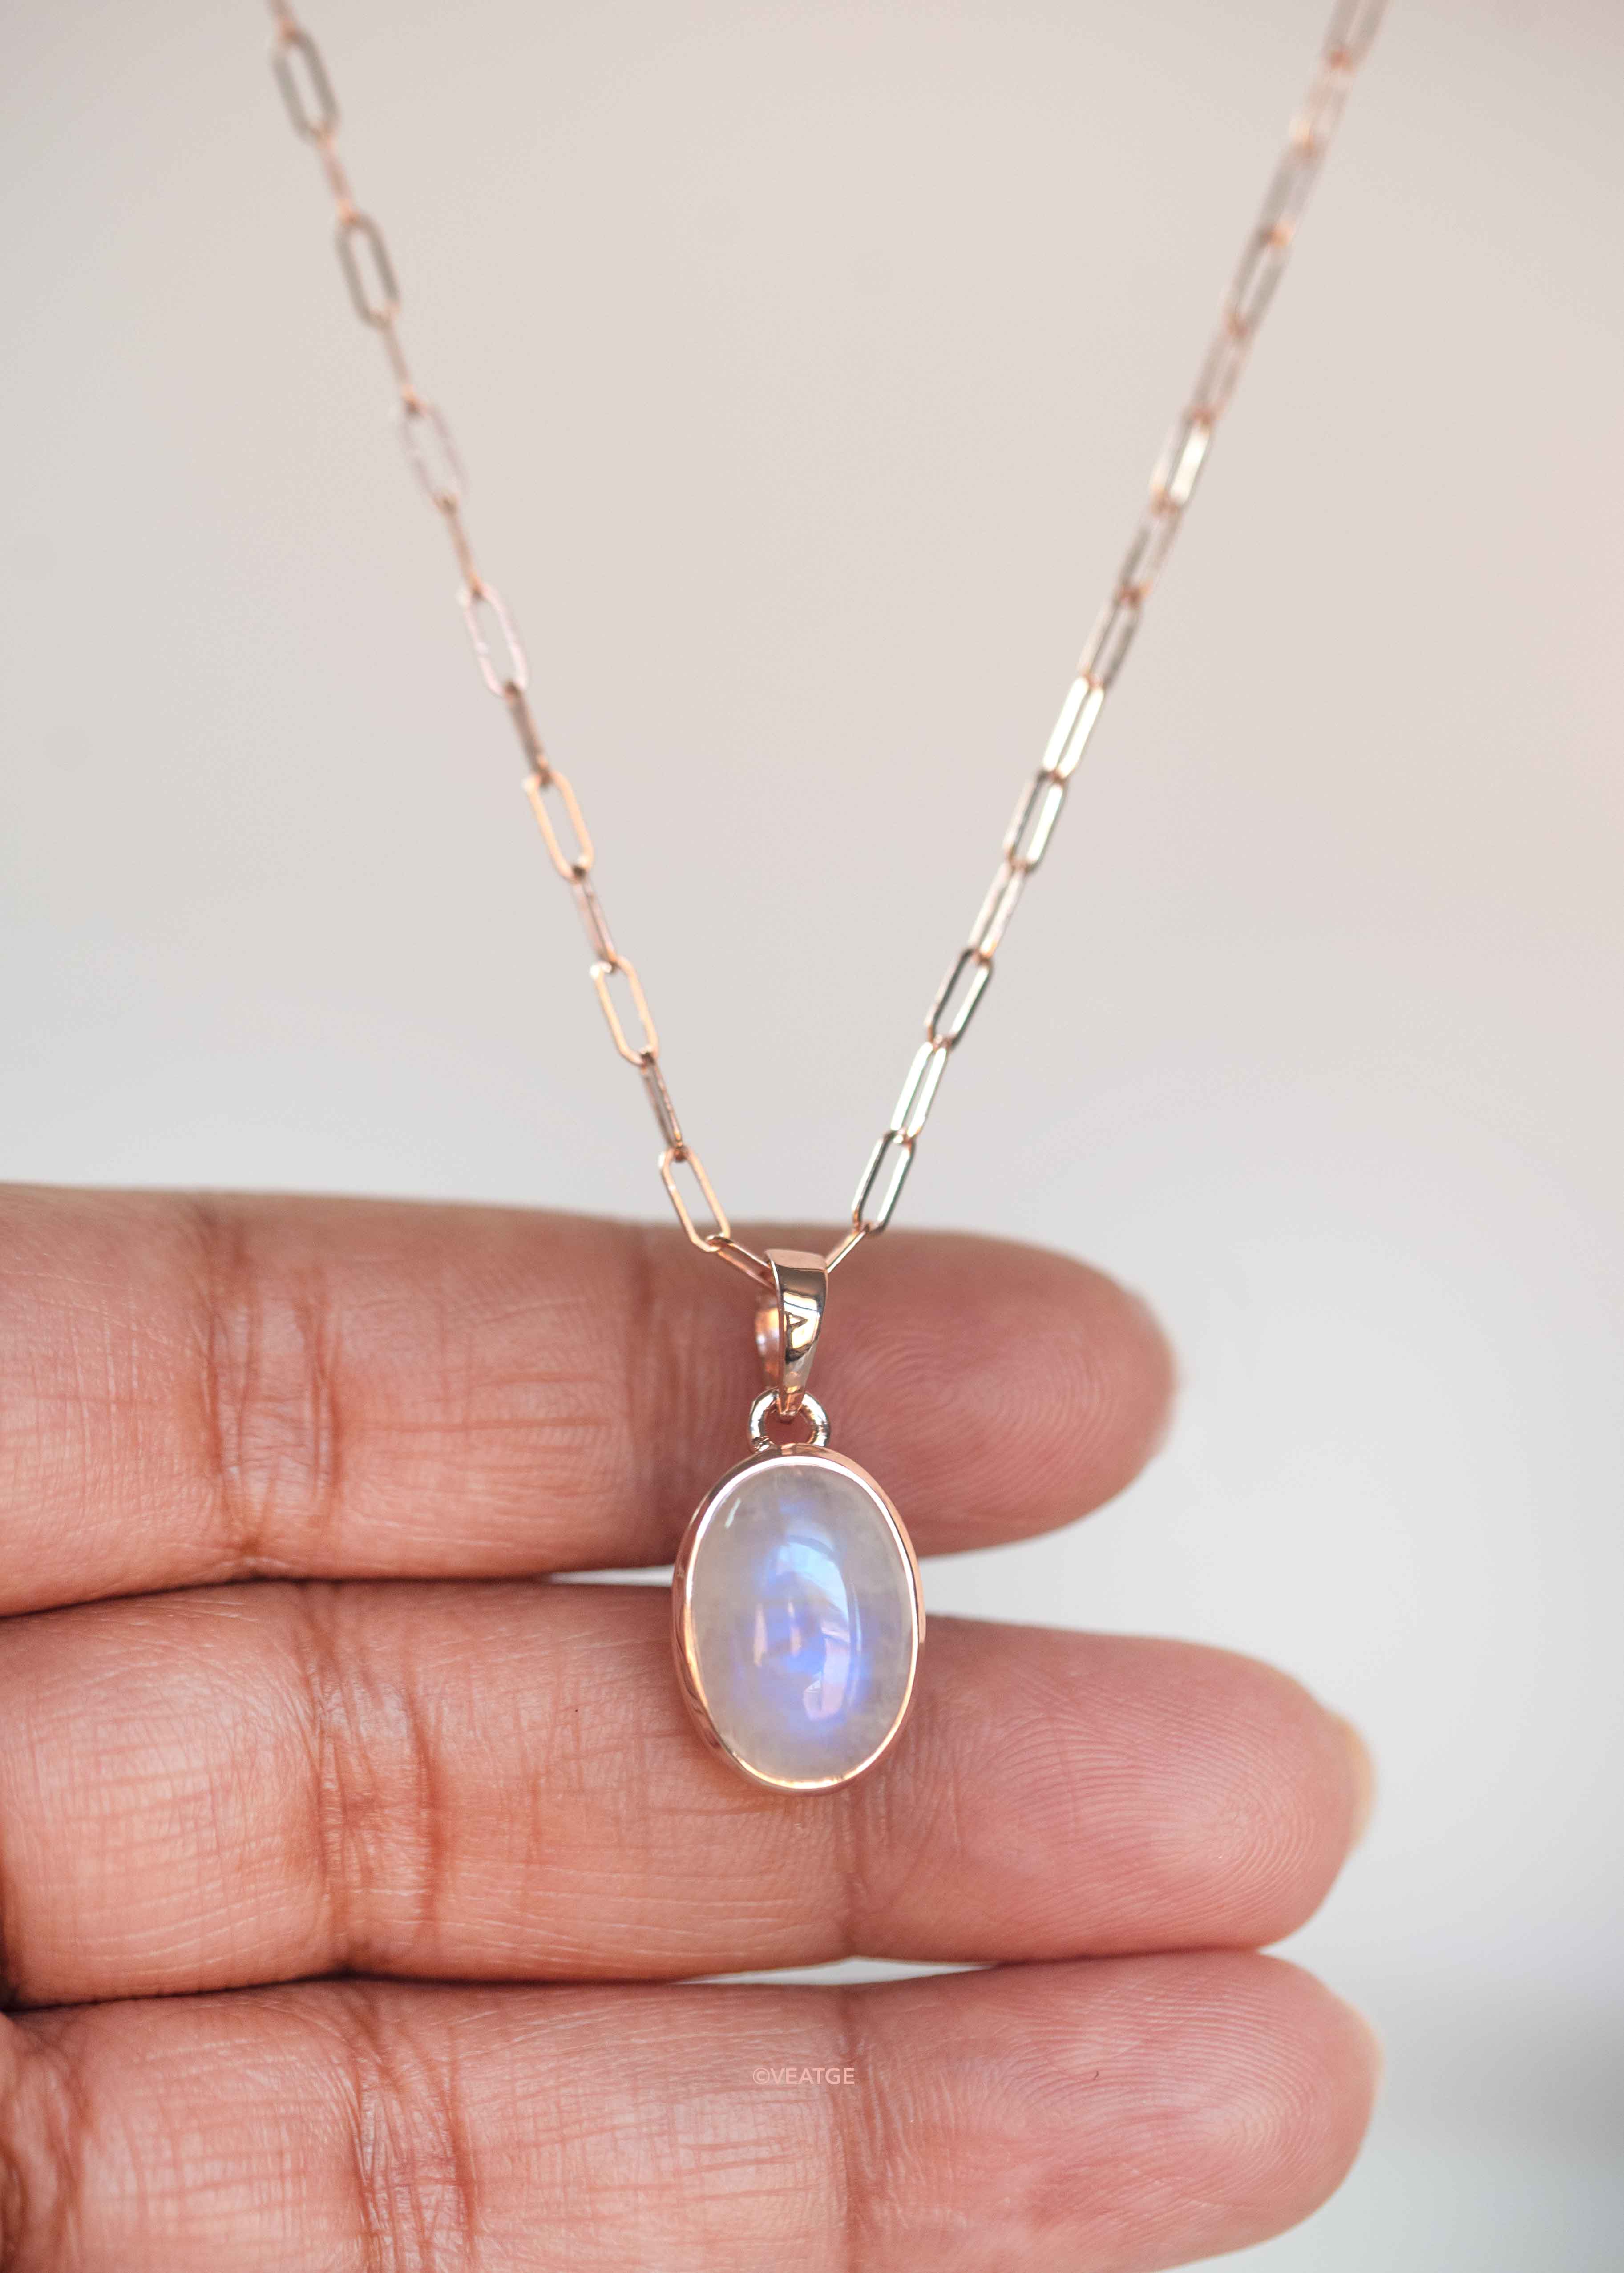 Where can I buy real and authentic moonstone jewelry? - Quora